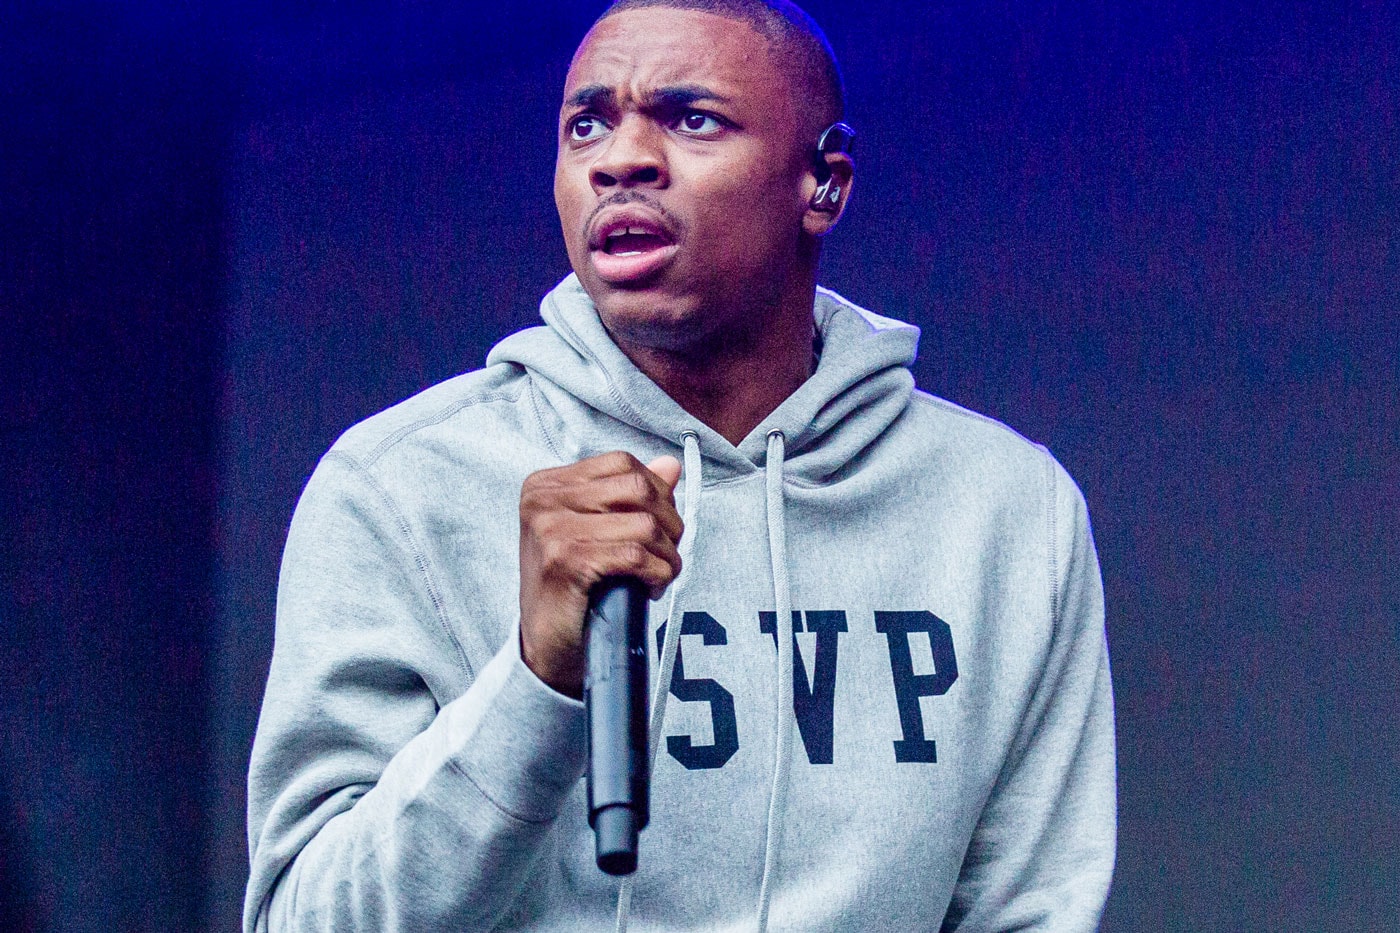 Vince Staples Defends Woman Upset Over "Norf Norf" Lyrics